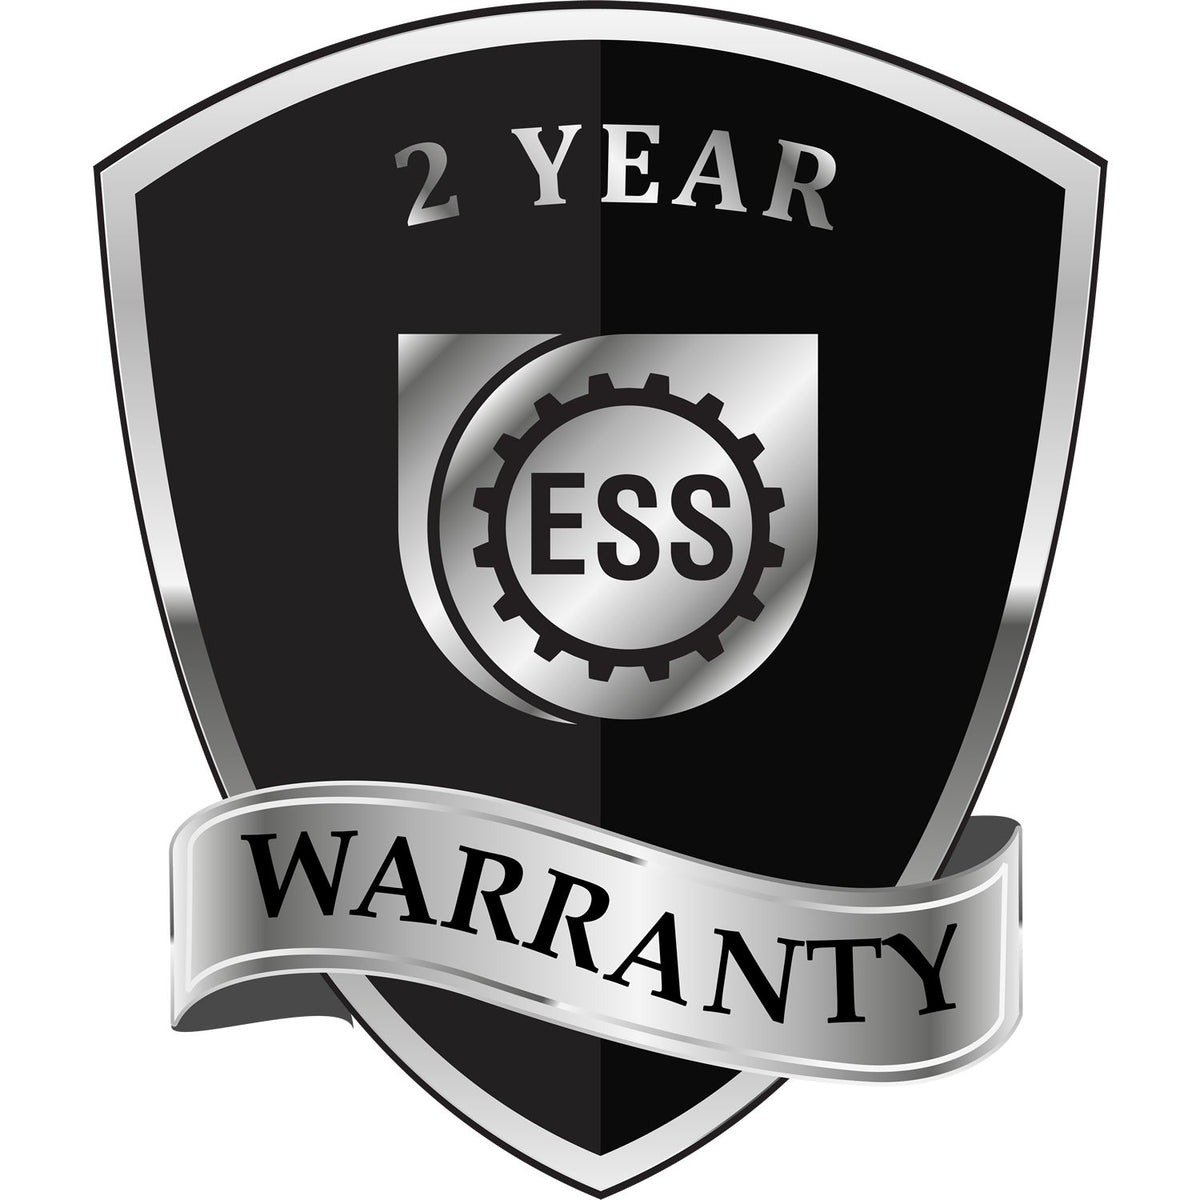 A black and silver badge or emblem showing warranty information for the Gift New Hampshire Landscape Architect Seal